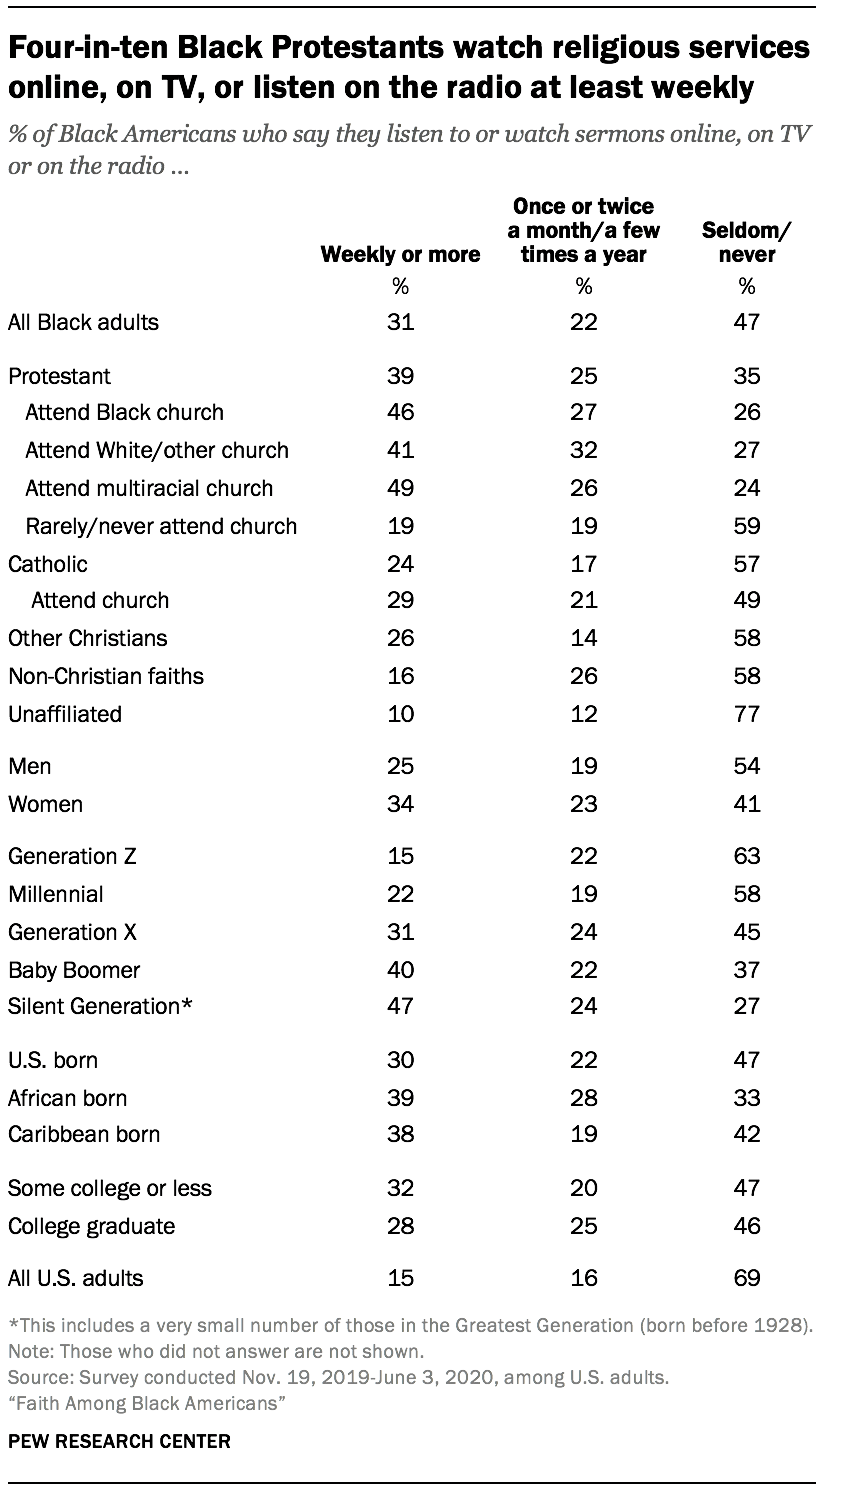 Four-in-ten Black Protestants watch religious services online, on TV, or listen on the radio at least weekly